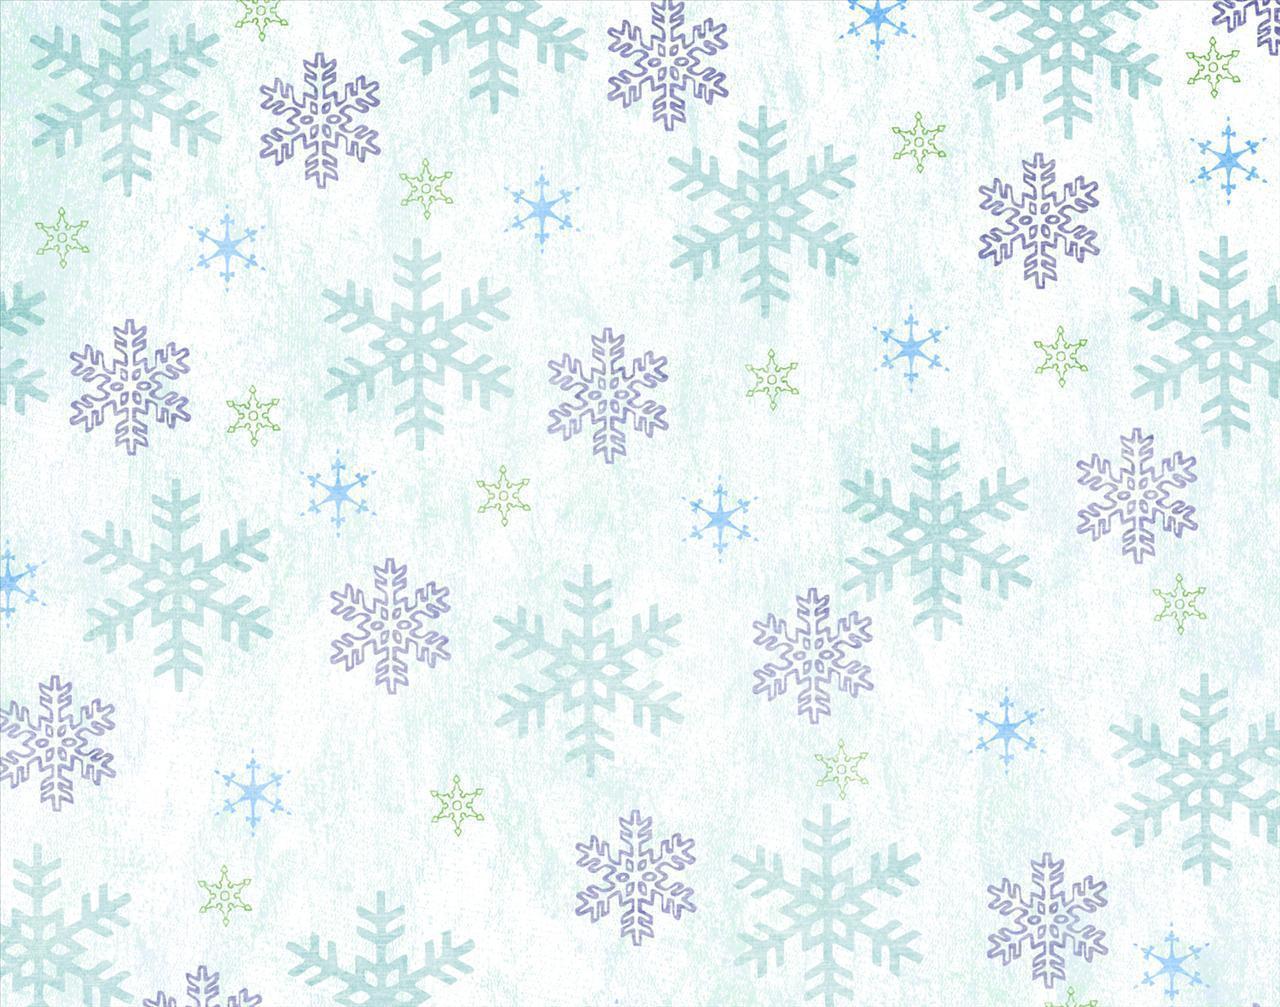 Snowflakes Backgrounds - Wallpaper Cave